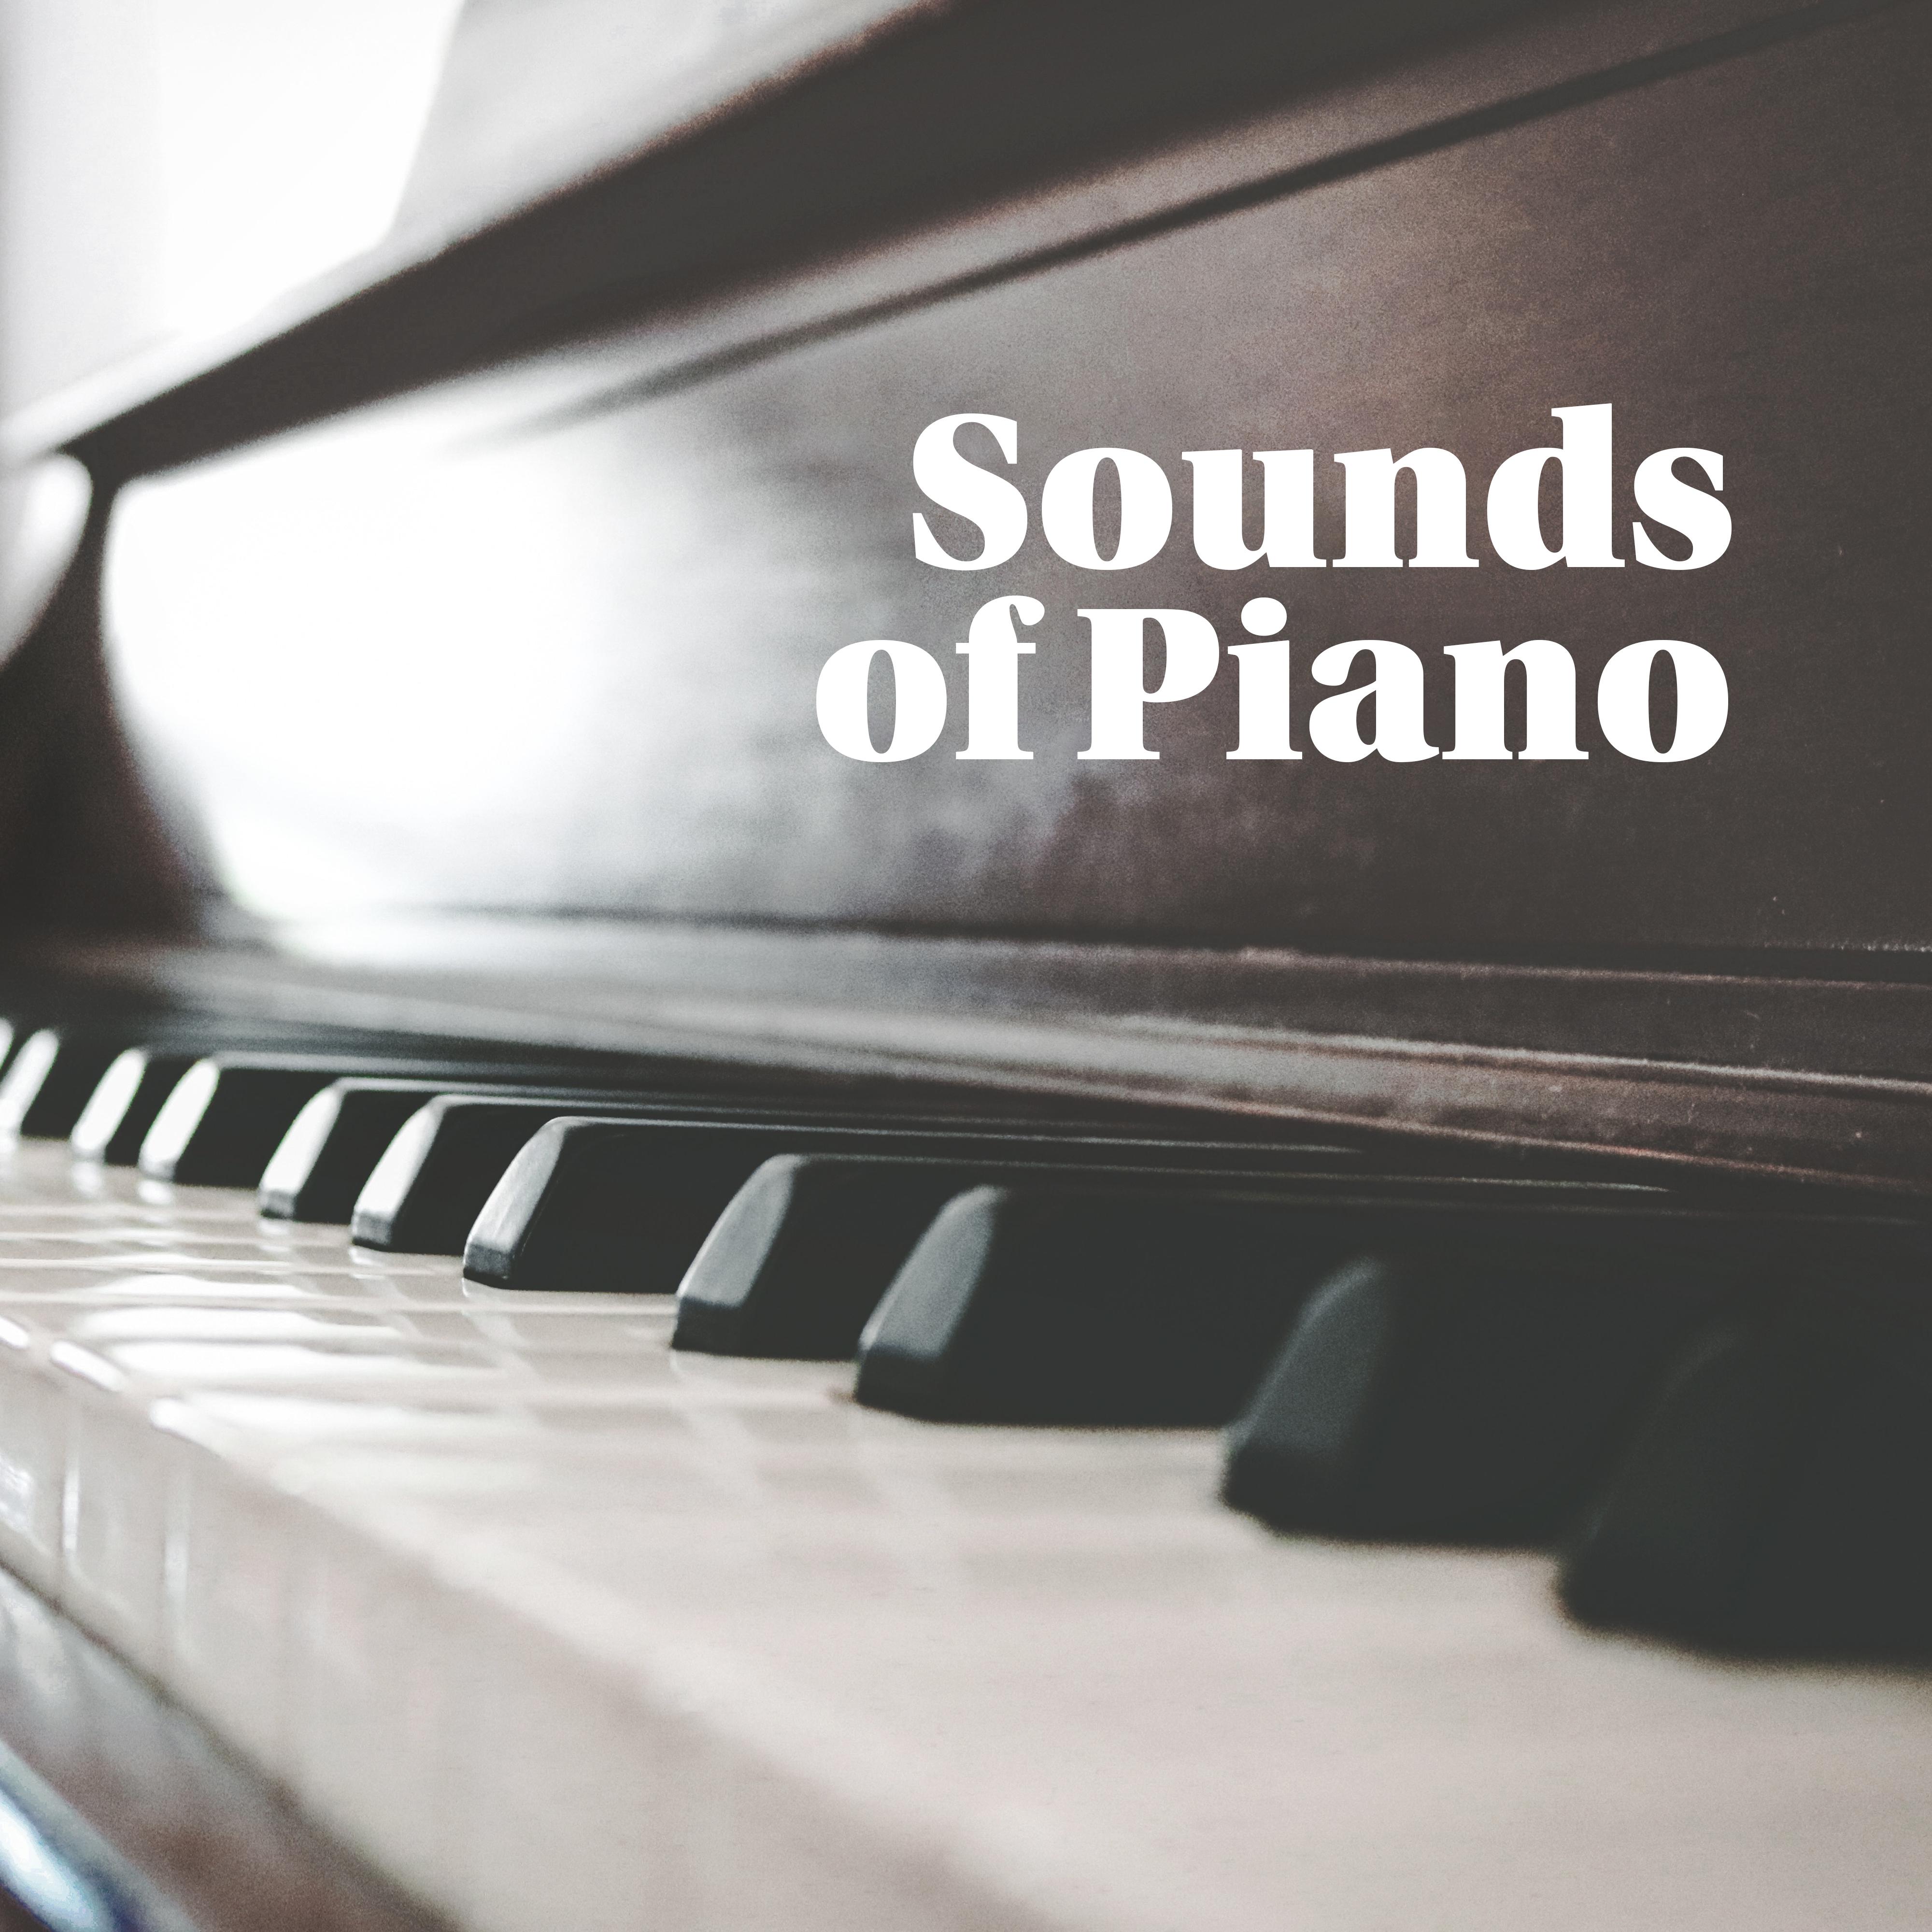 Sounds of Piano: Instrumental Jazz Music Ambient, Beautiful Piano Music, Jazz Lounge, Piano Melodies at Night, Pure Relaxation